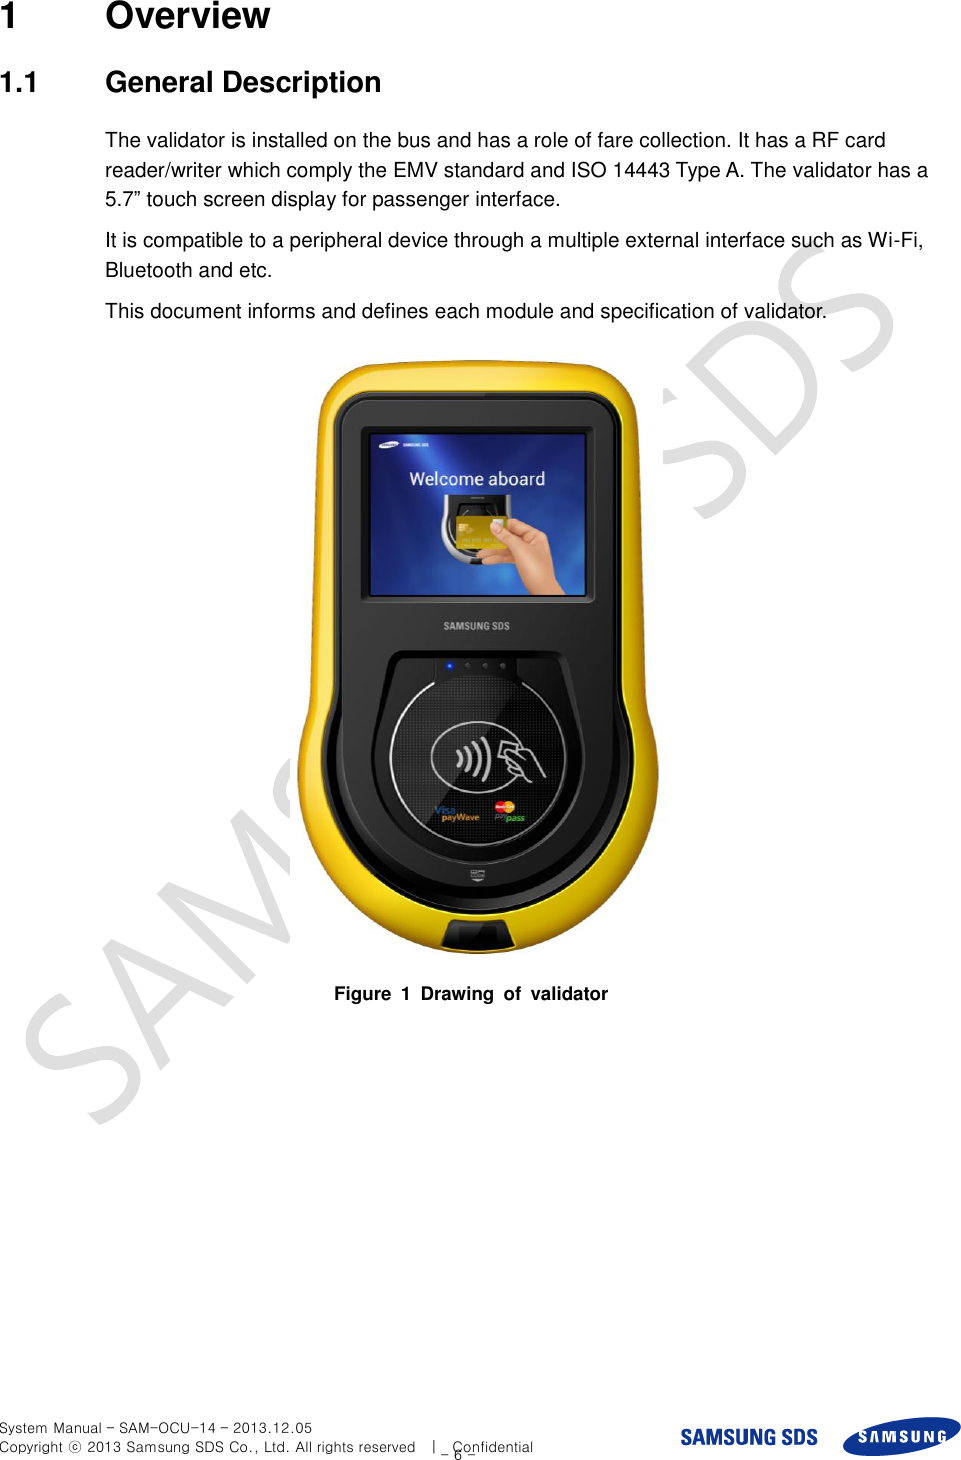  System Manual – SAM-OCU-14 – 2013.12.05 Copyright ⓒ 2013 Samsung SDS Co., Ltd. All rights reserved    |    Confidential - 6 - 1  Overview 1.1  General Description The validator is installed on the bus and has a role of fare collection. It has a RF card reader/writer which comply the EMV standard and ISO 14443 Type A. The validator has a 5.7” touch screen display for passenger interface. It is compatible to a peripheral device through a multiple external interface such as Wi-Fi, Bluetooth and etc. This document informs and defines each module and specification of validator.    Figure  1  Drawing  of  validator  